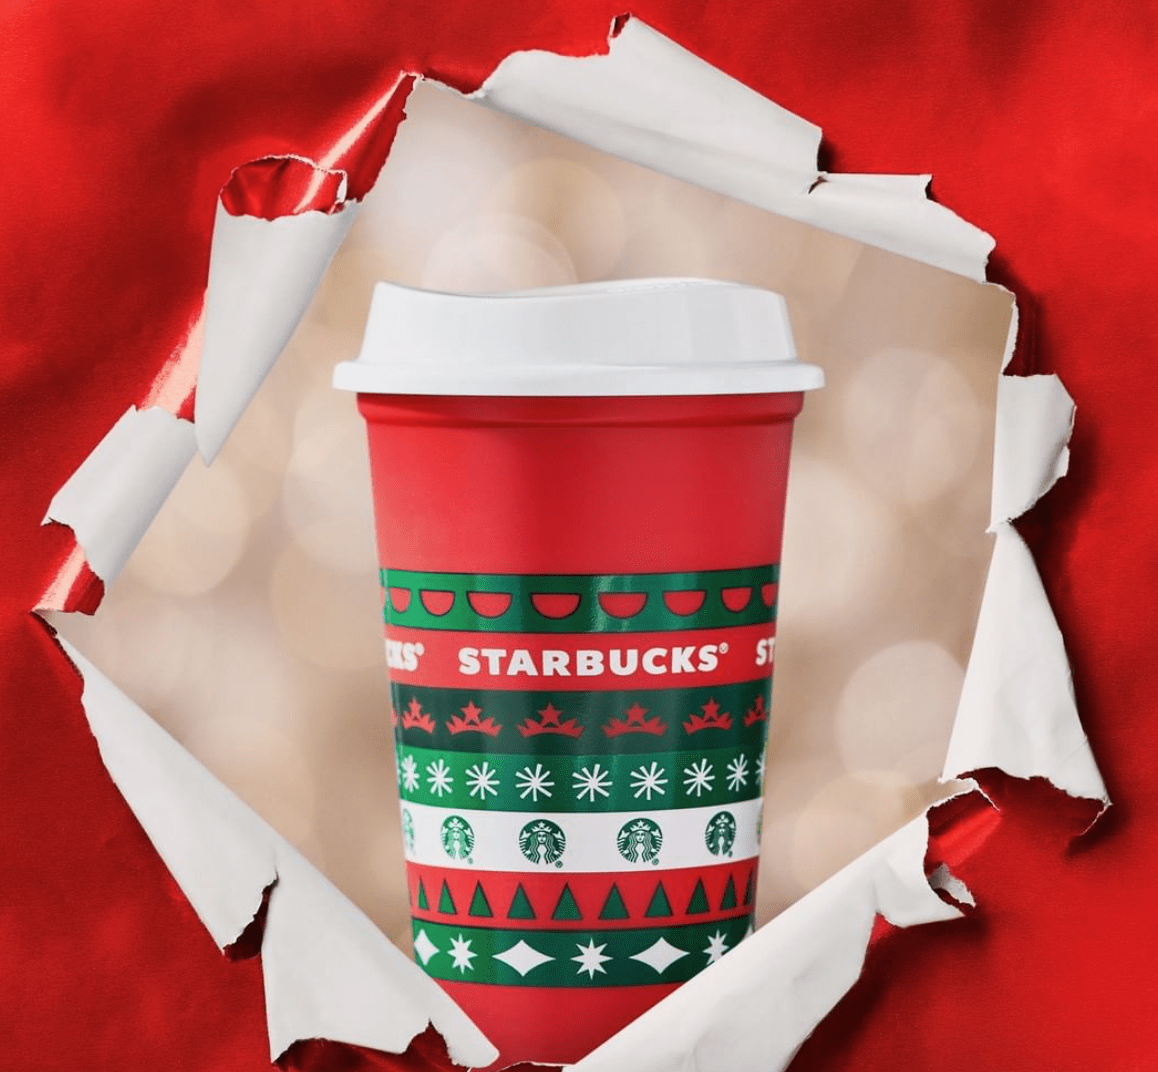 Today Is The Day To Get Your Free Starbucks Reusable Holiday Cups